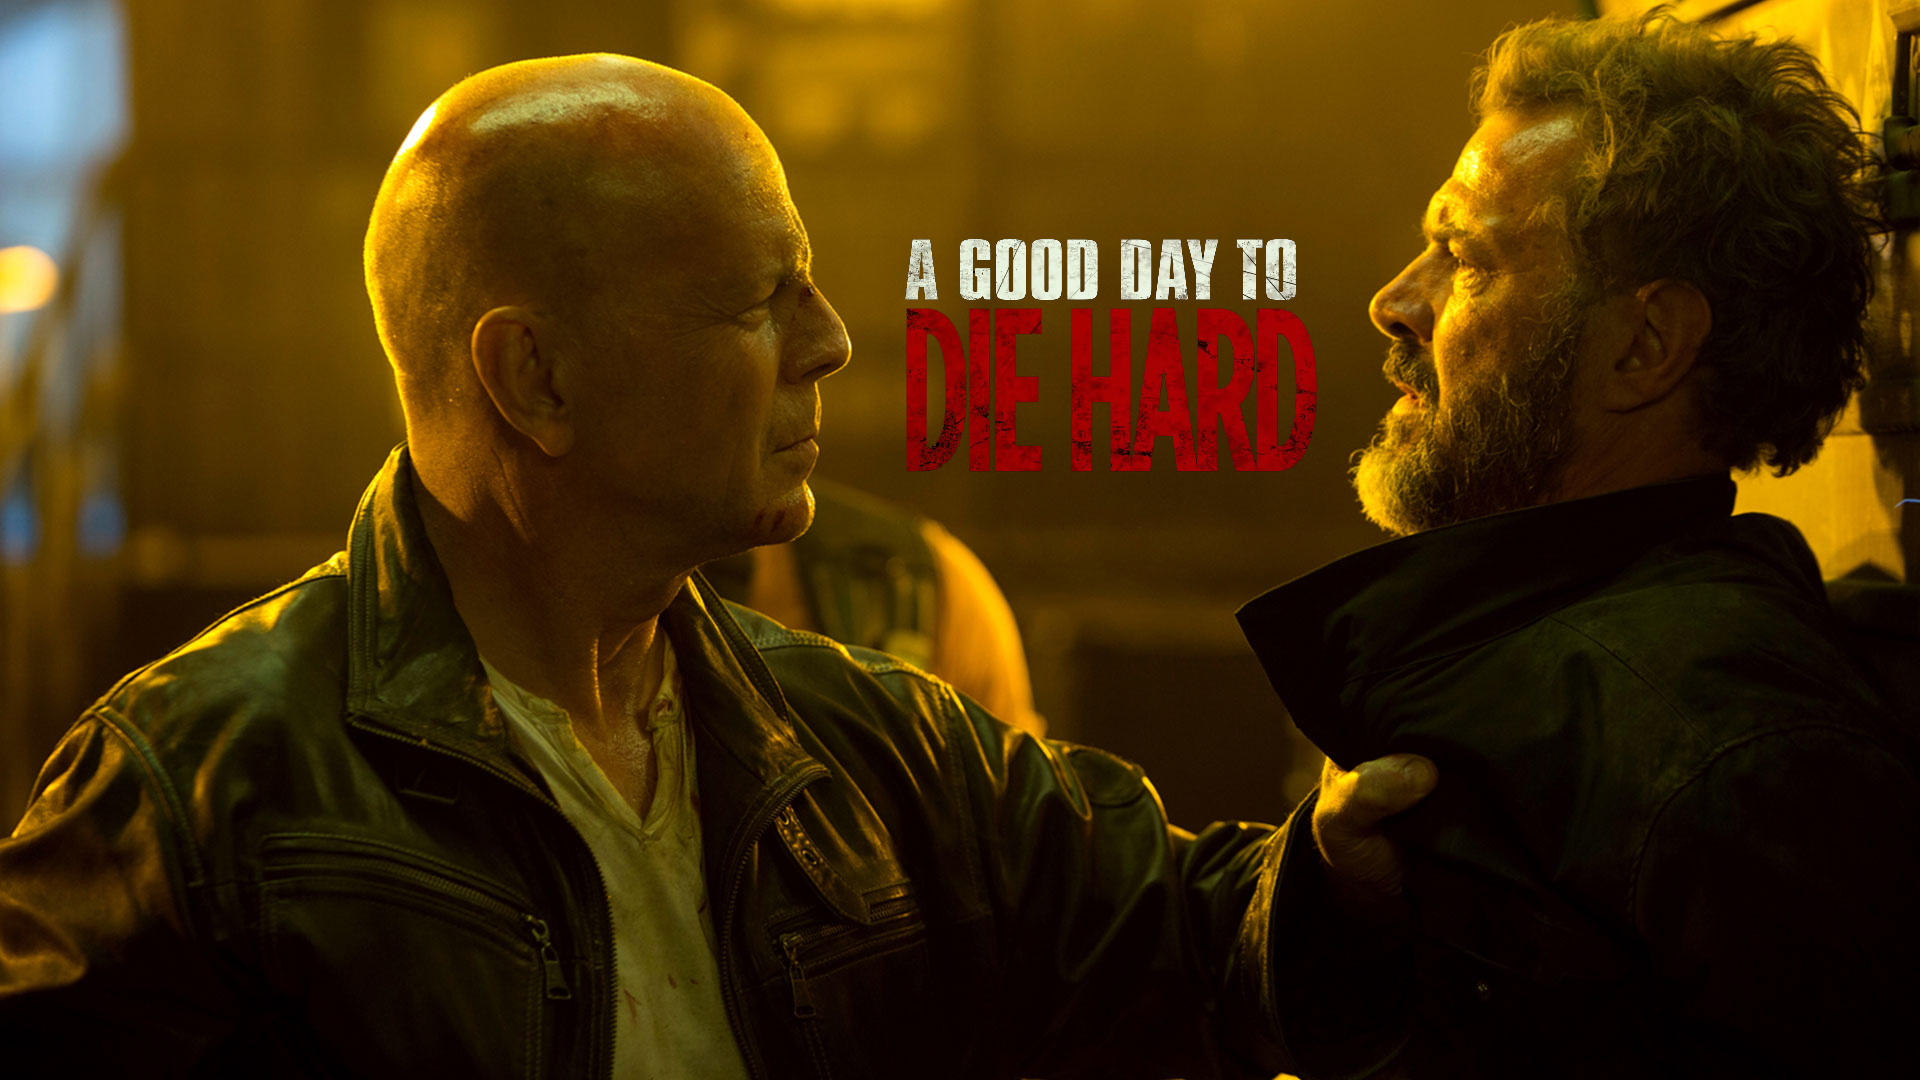 A Good Day to Die Hard wallpaper 4